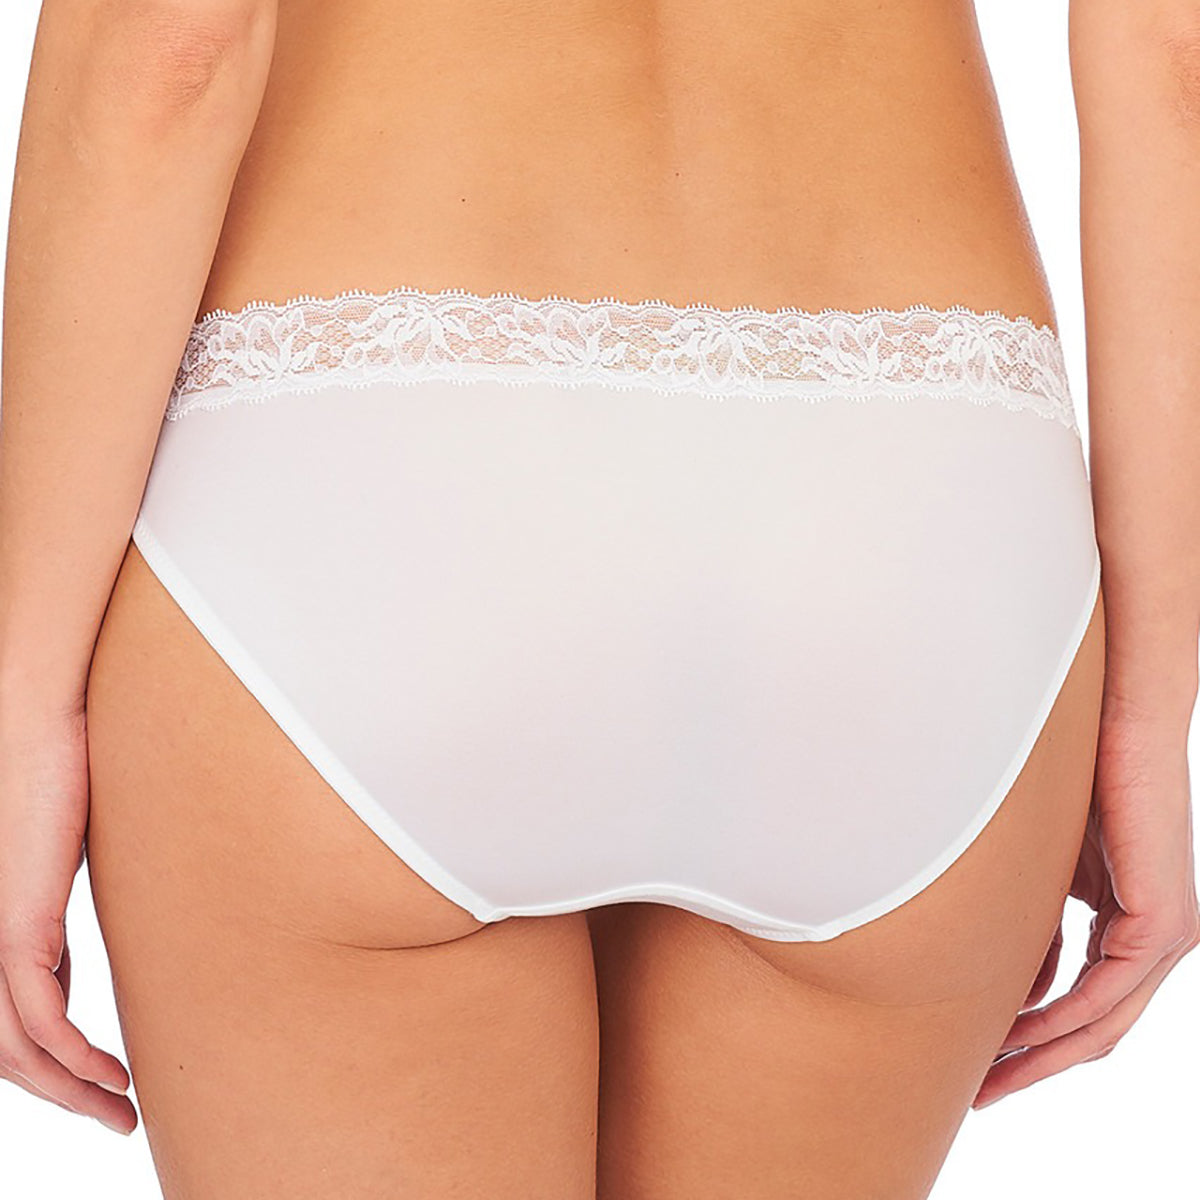 Buy Victoria's Secret White Limoncello Lace Waist Cotton Cheeky Knickers  from Next Hungary